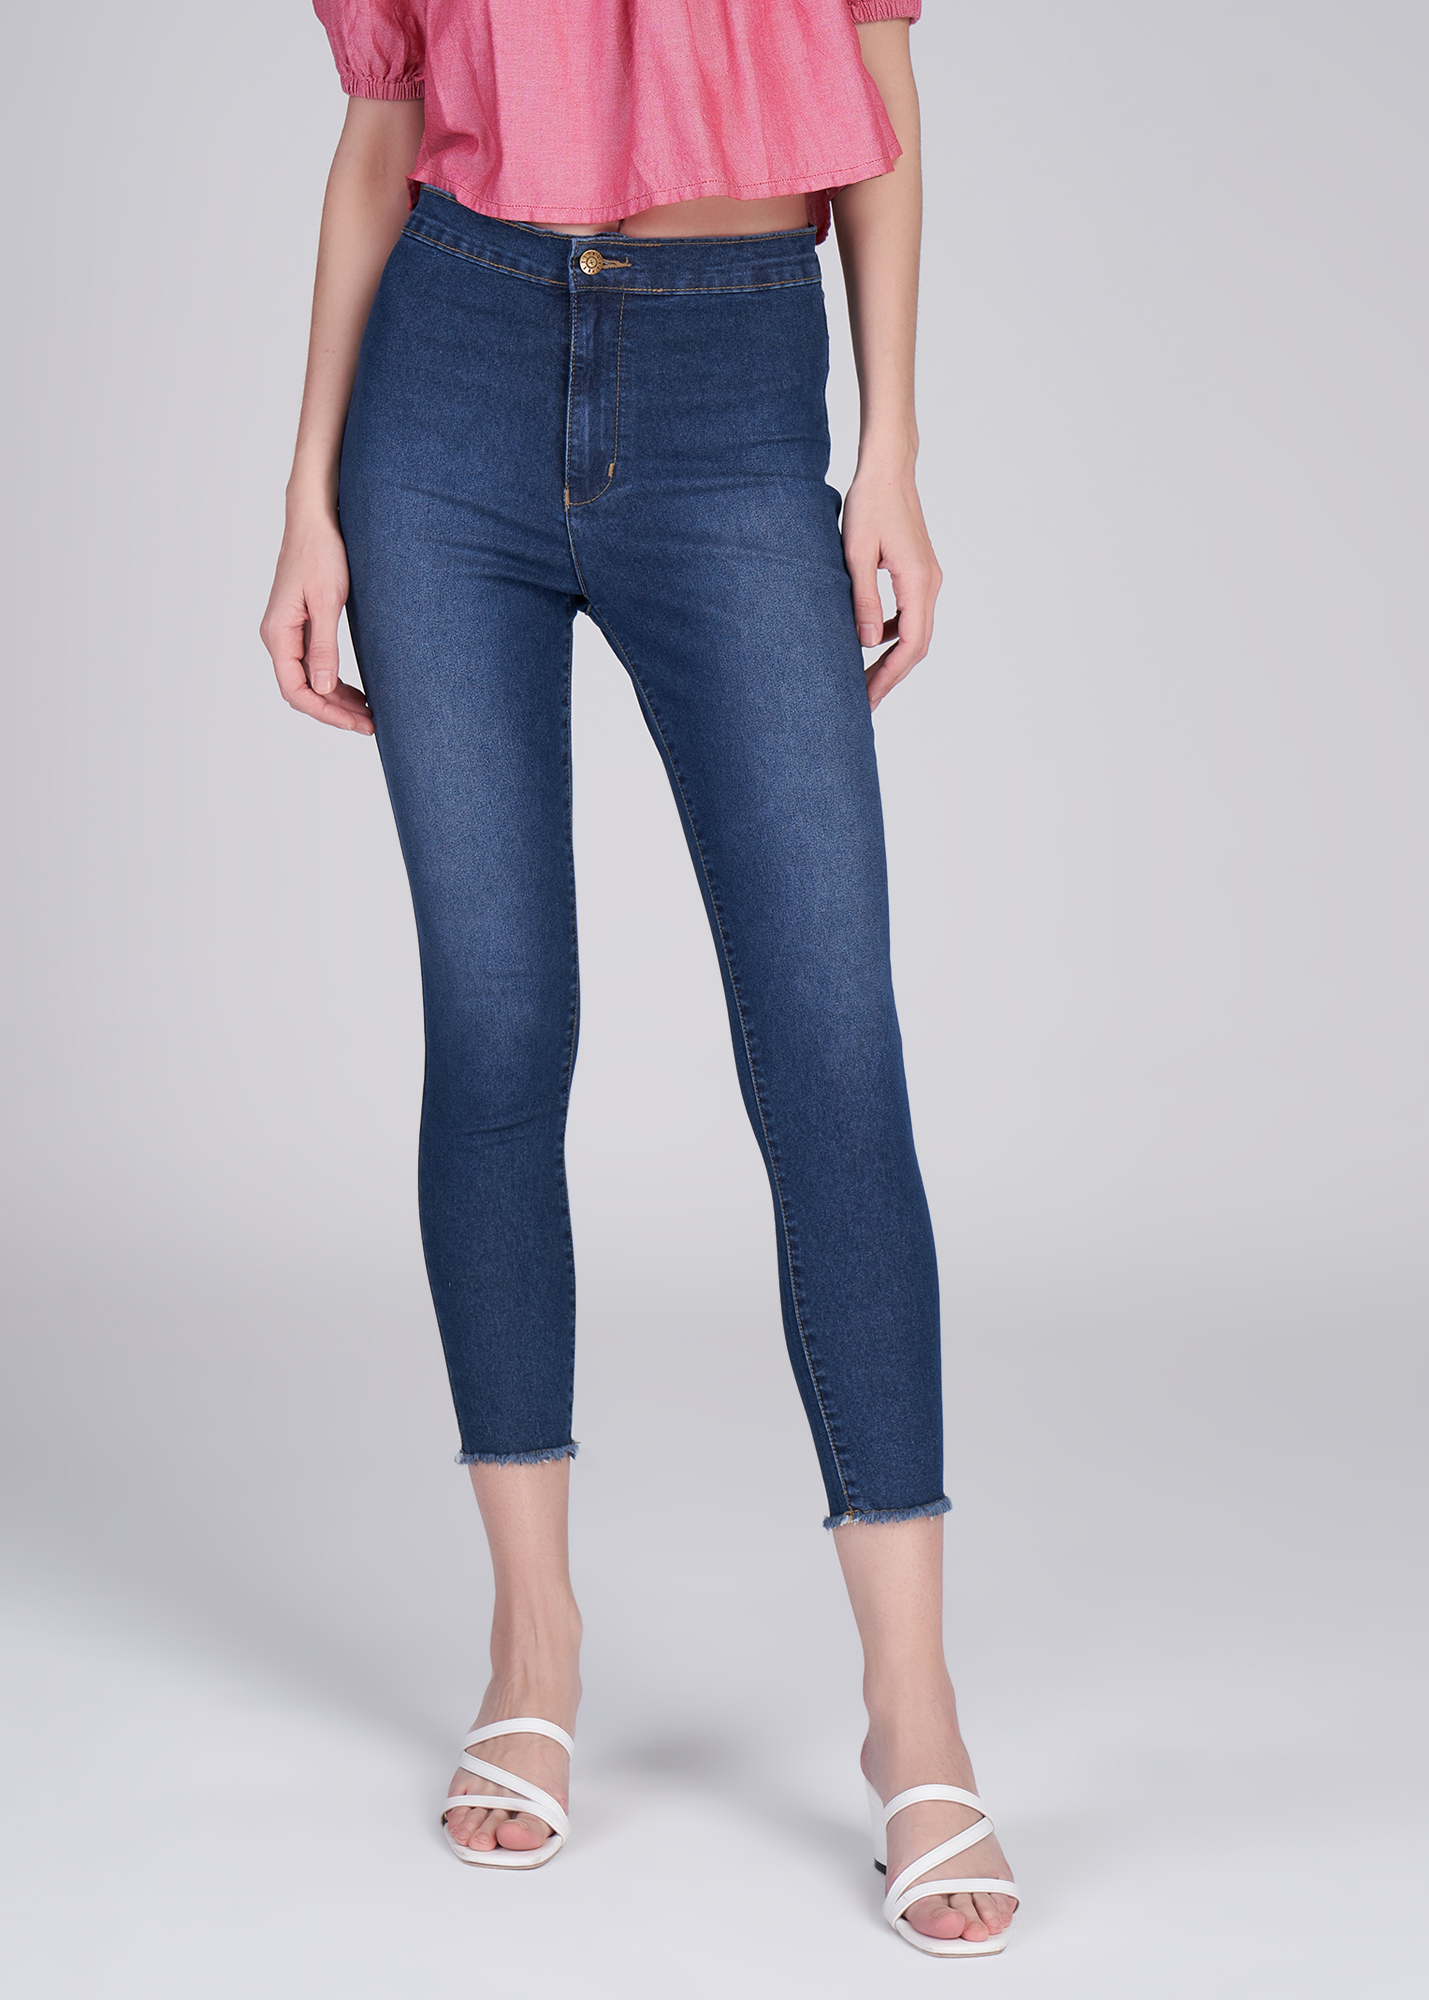 High Rise Skinny Ankle Jeans (Dk. Blue) - Next Jeans Philippines